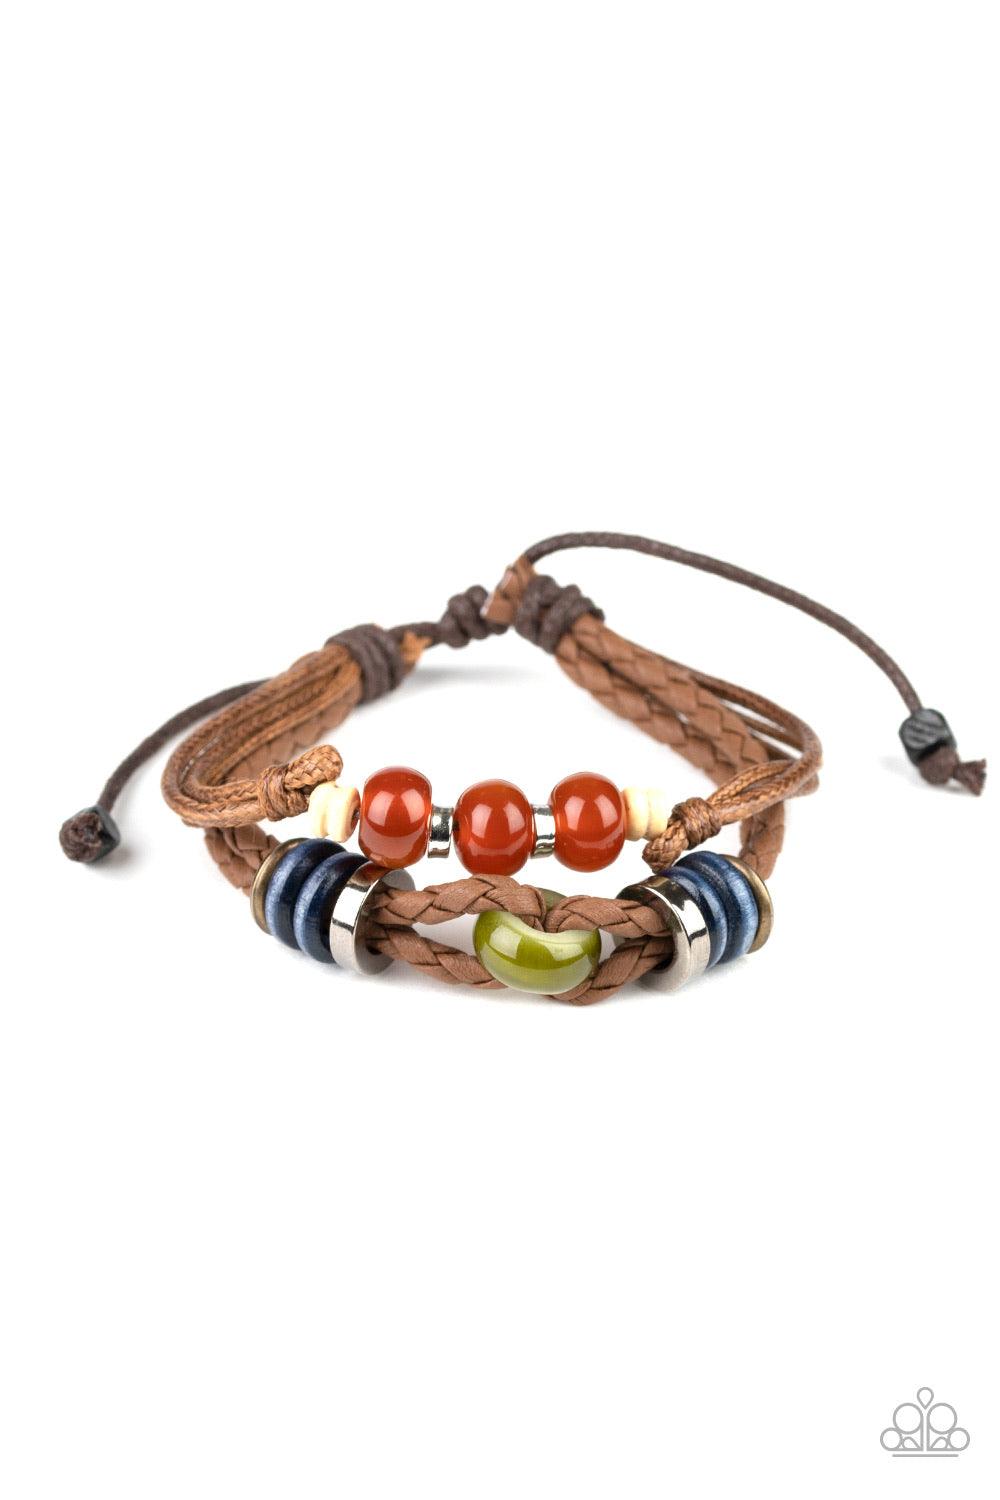 Paparazzi Accessories Uncharted Territory ~Brown A colorful collection of glassy, wooden, and metallic beads are threaded along strands of shiny twine and braided leather cording for an urban flair. Features an adjustable sliding knot closure.